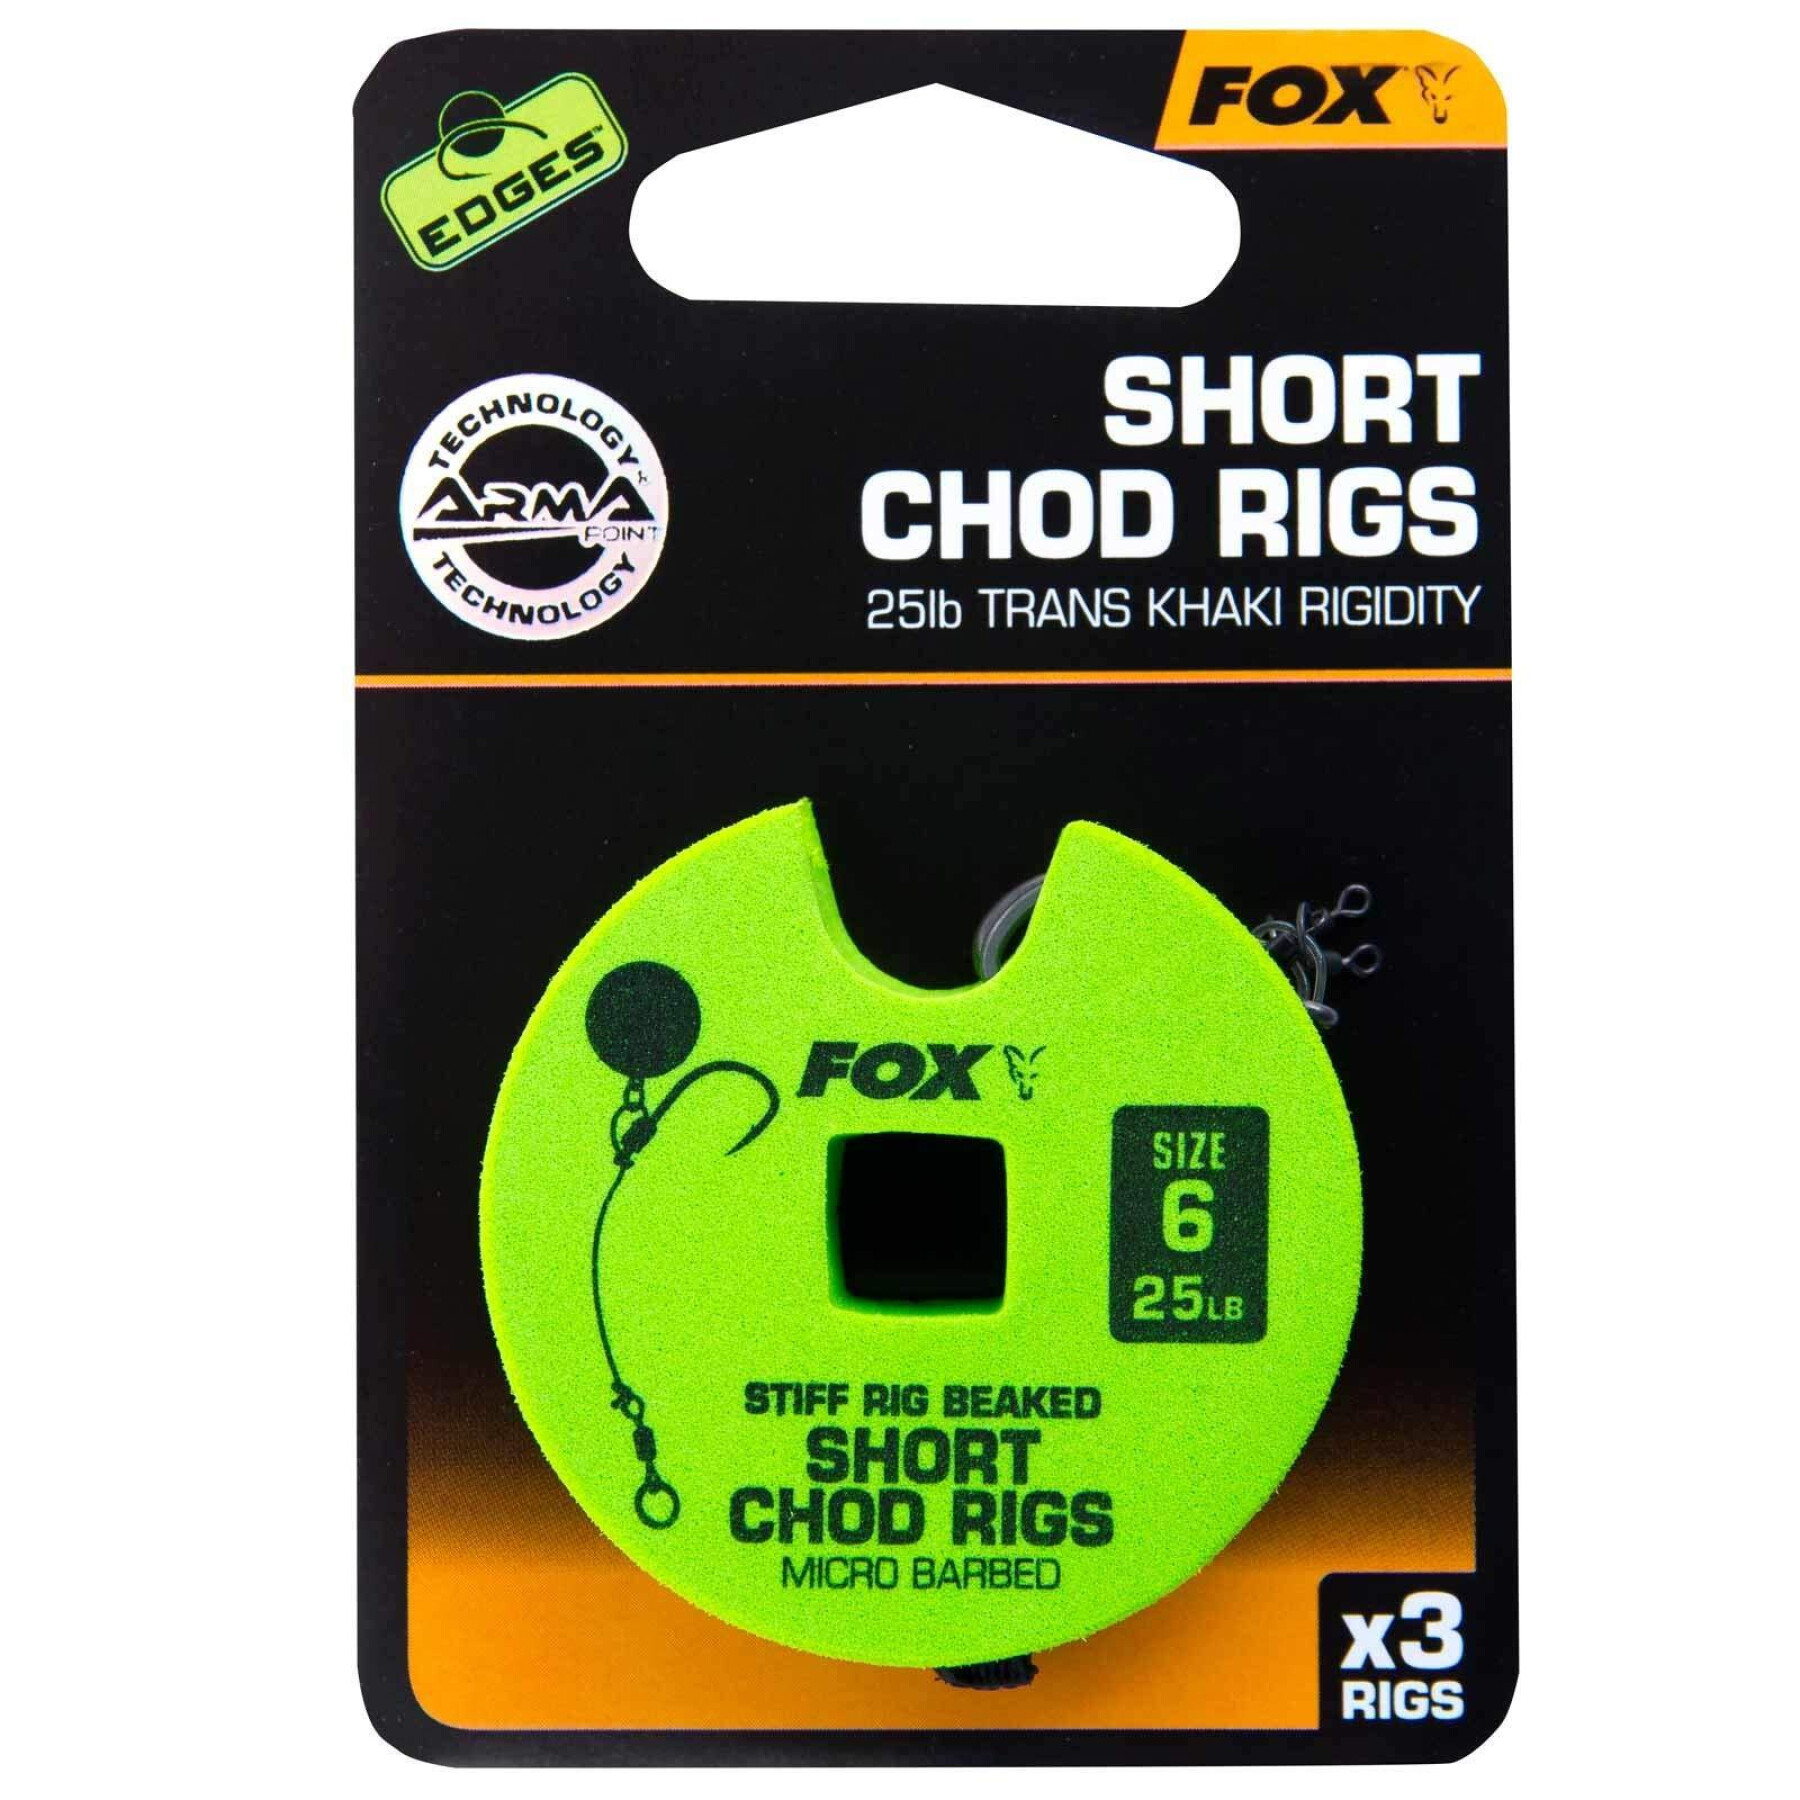 Monofilament Fox 25lb Shorts Chod Rig Barbed taille 6